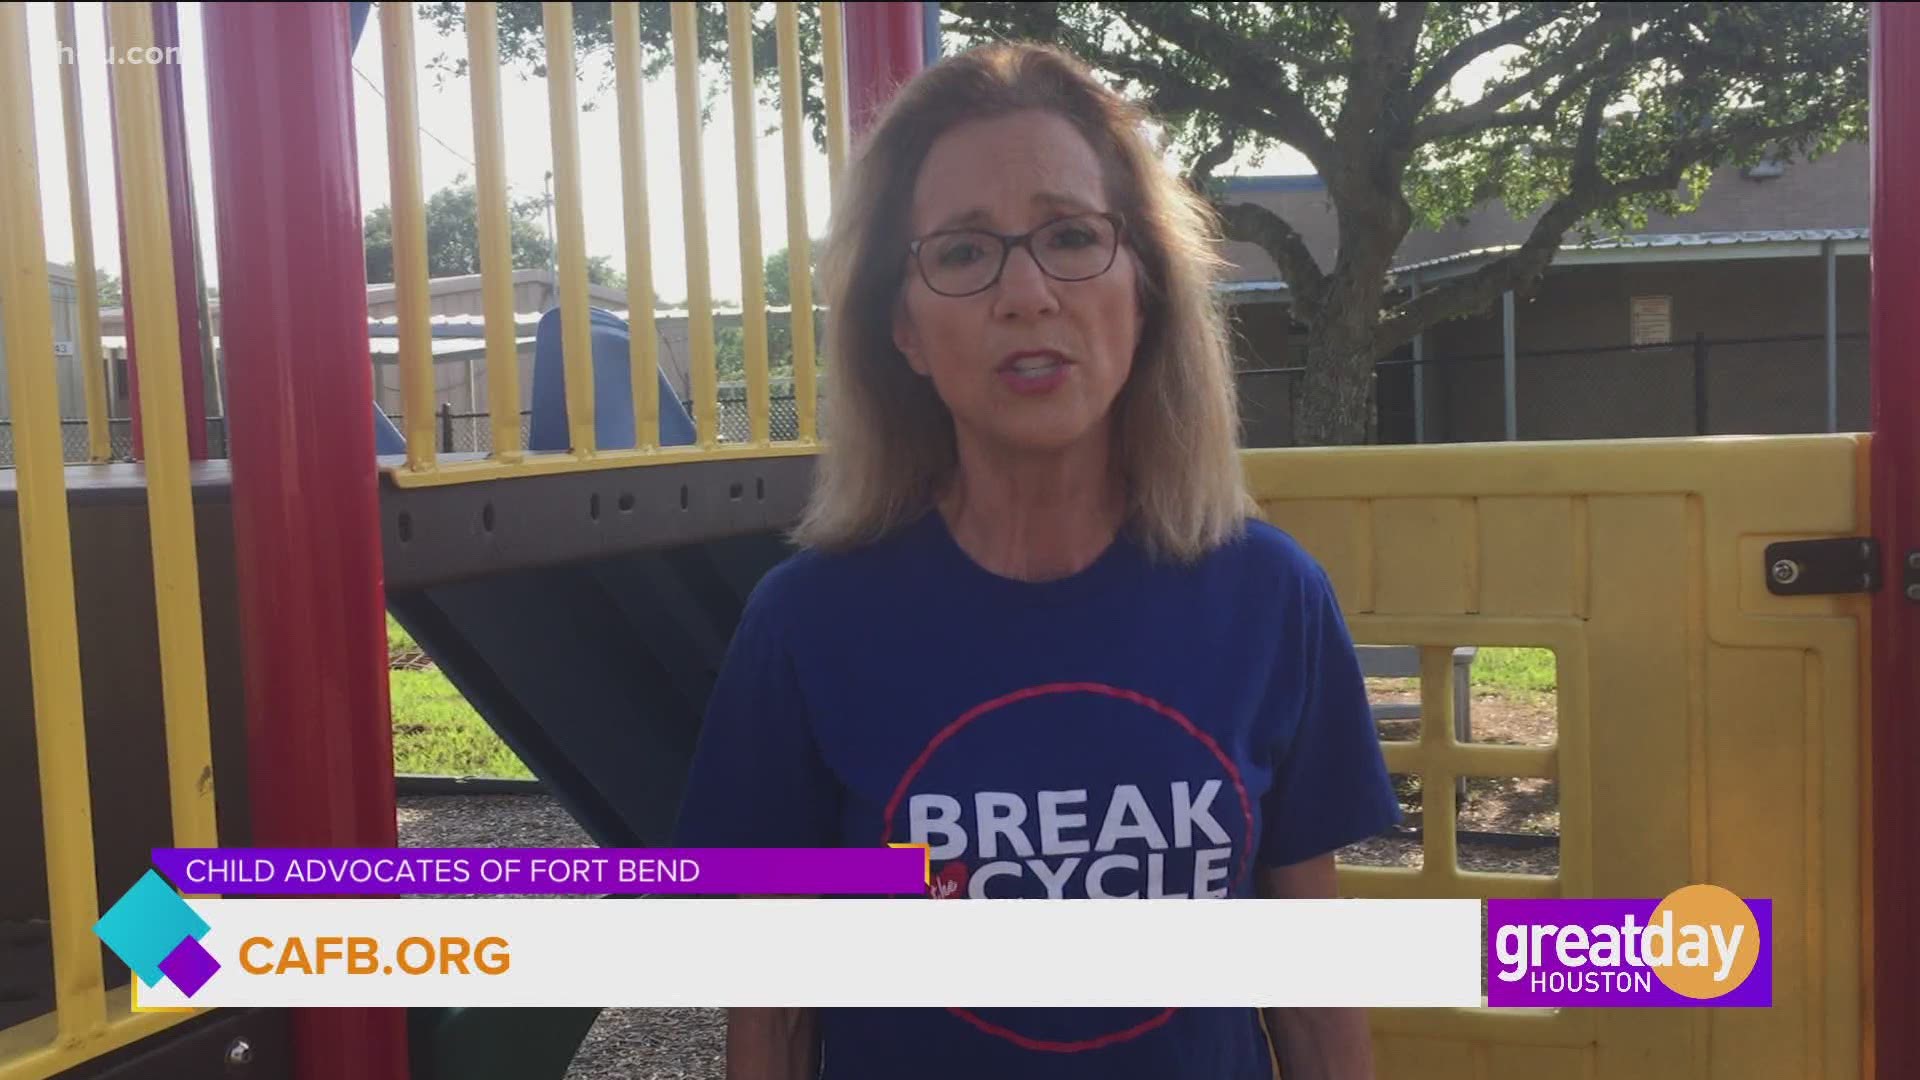 Ruthanne Mefford, CEO of Child Advocates of Fort Bend, is breaking the cycle of child abuse in Fort Bend County.